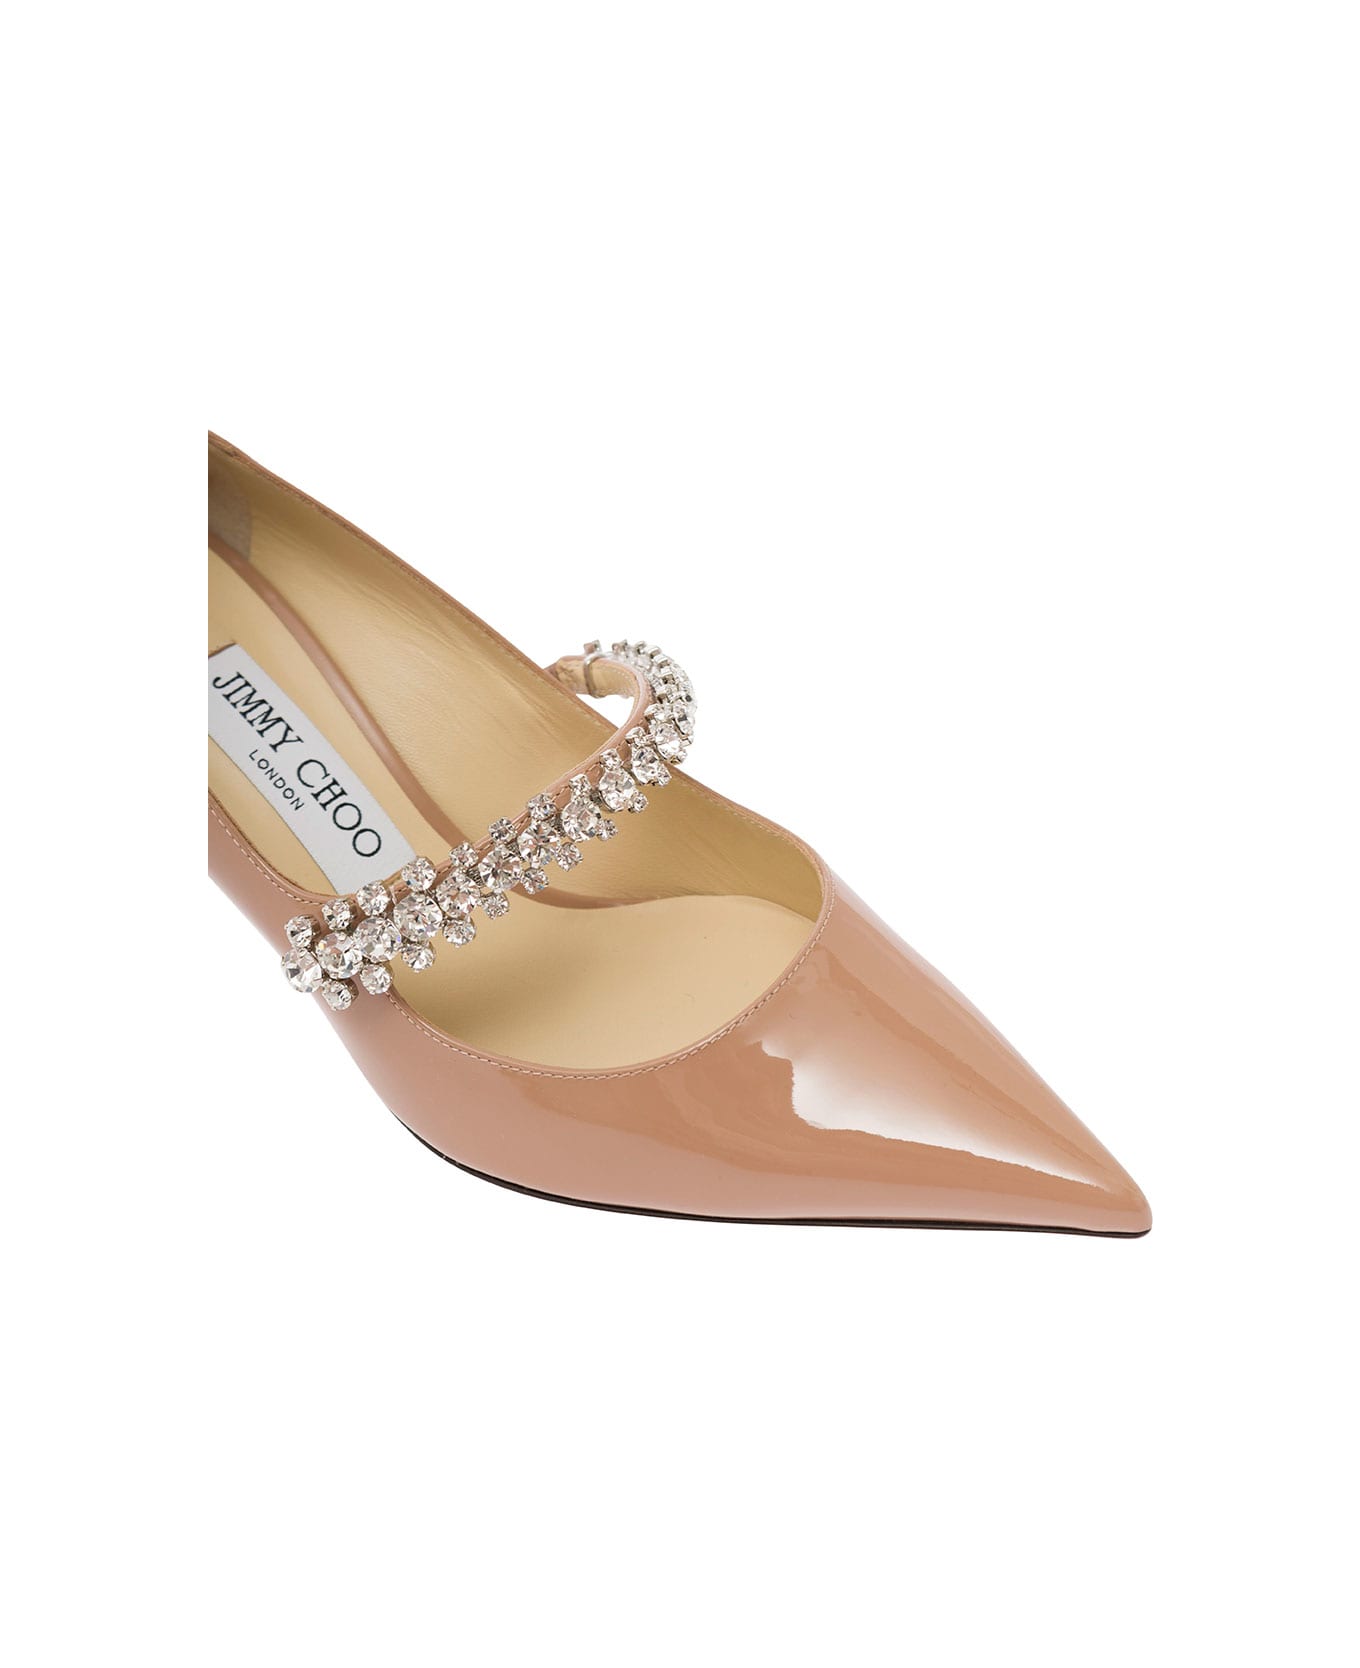 Jimmy Choo 'bing' Pink Pumps With Crystal Embellishment In Patent Leather Woman - Beige